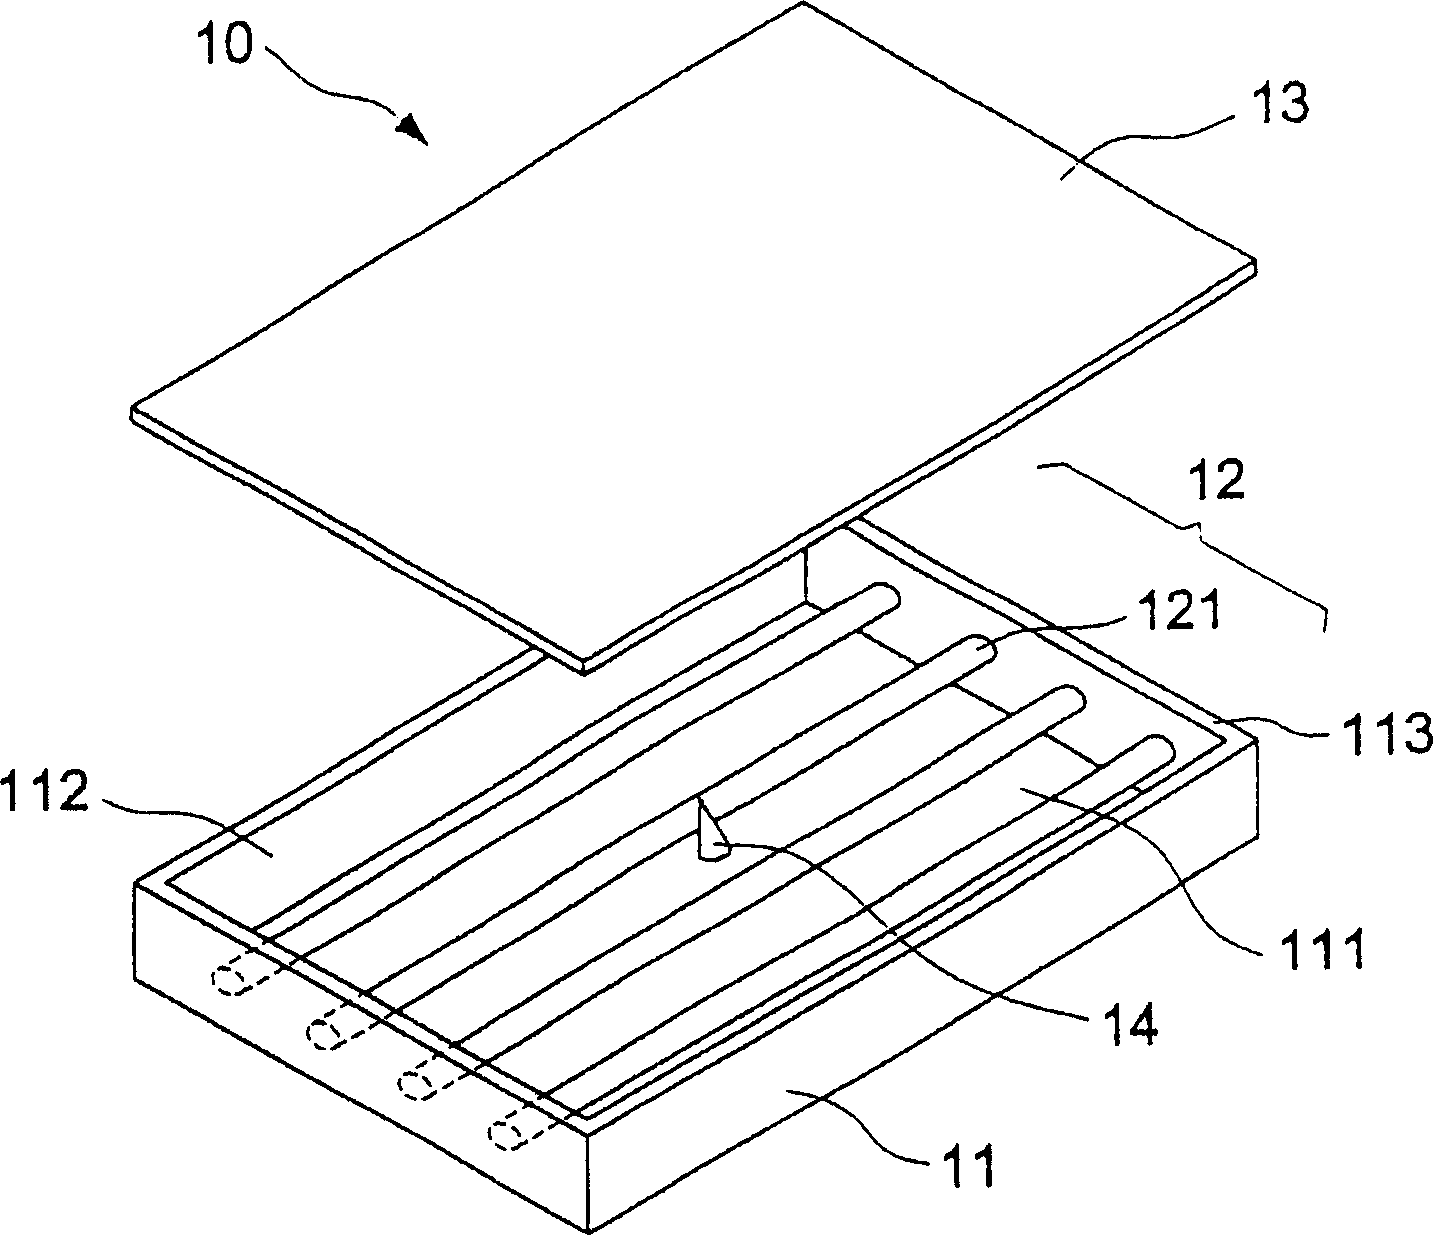 Backlight plate device